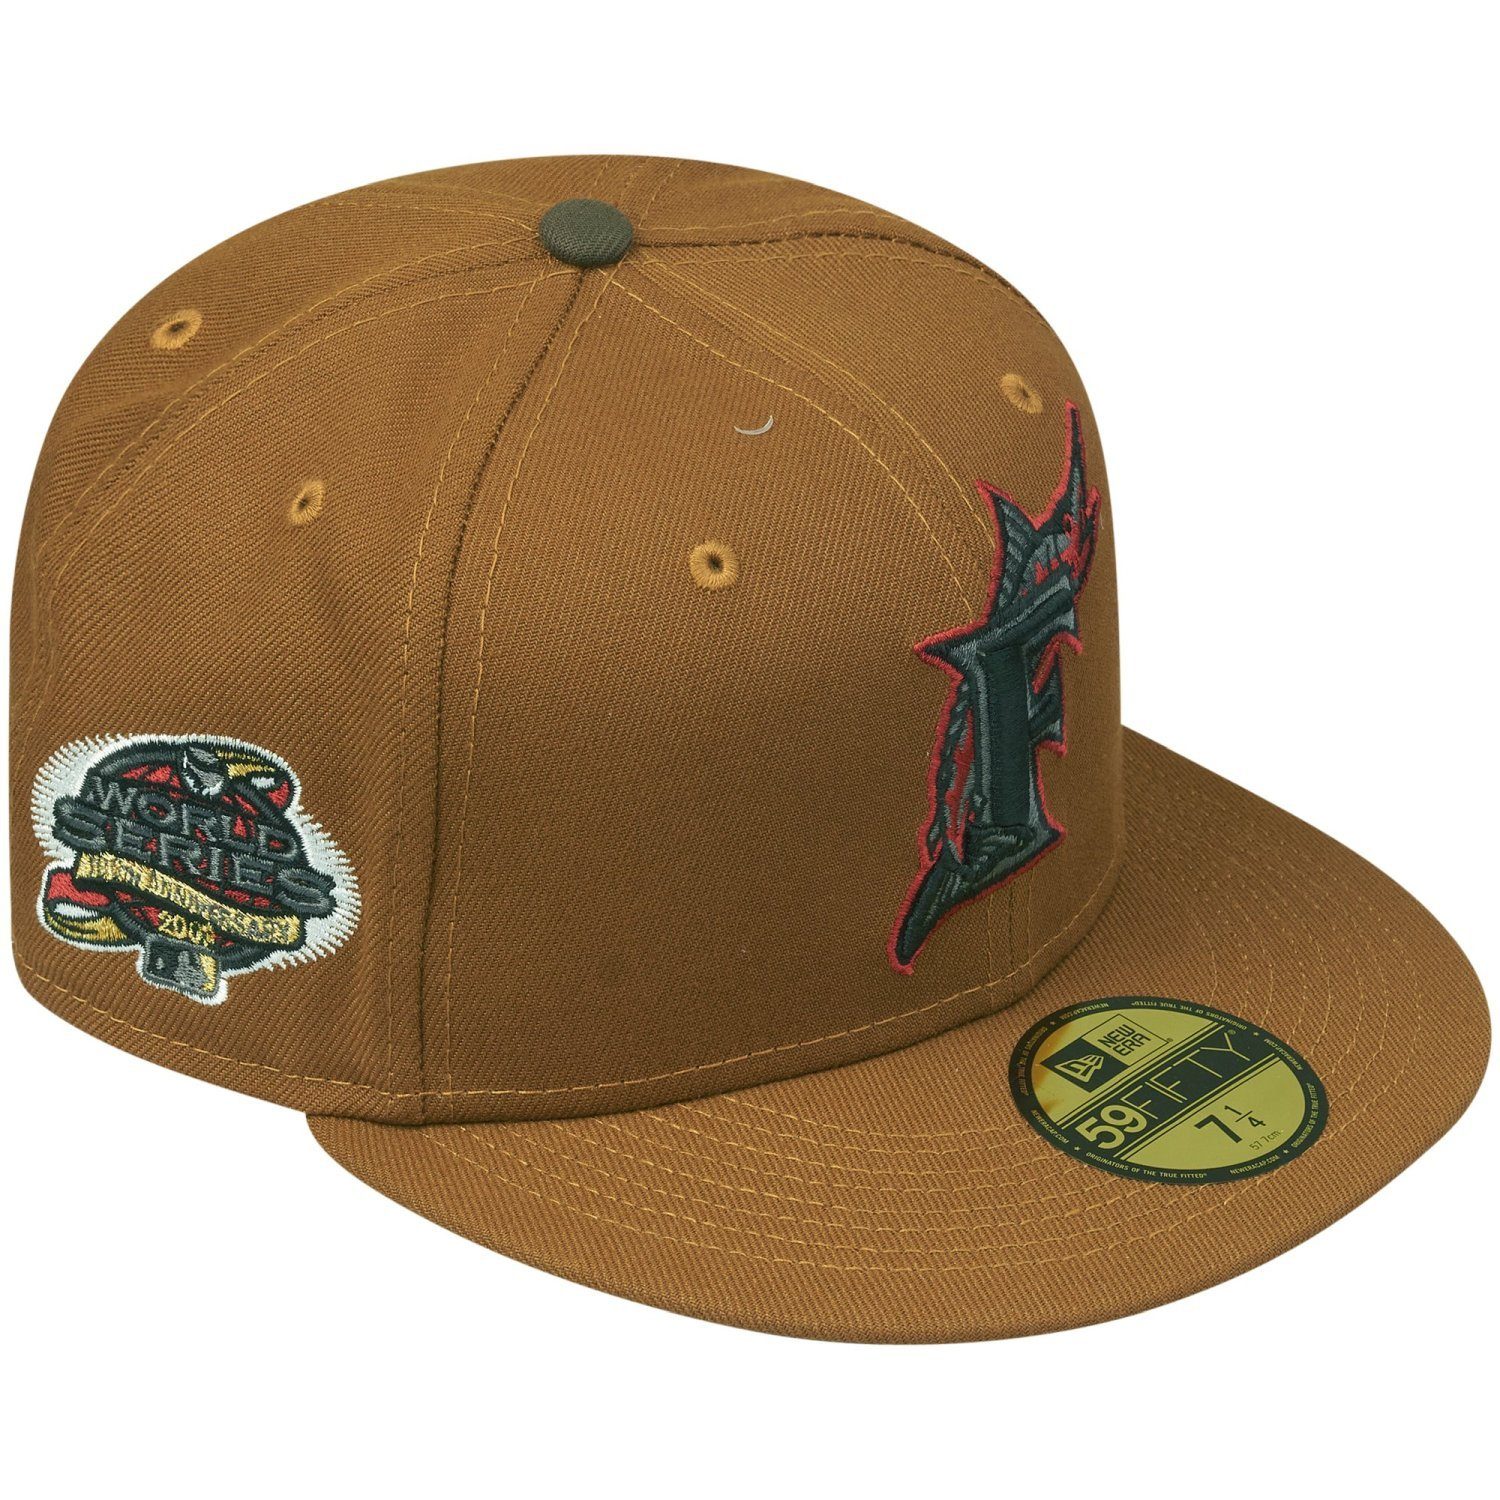 New Era Fitted Cap WORLD Florida 2003 Marlins 59Fifty SERIES